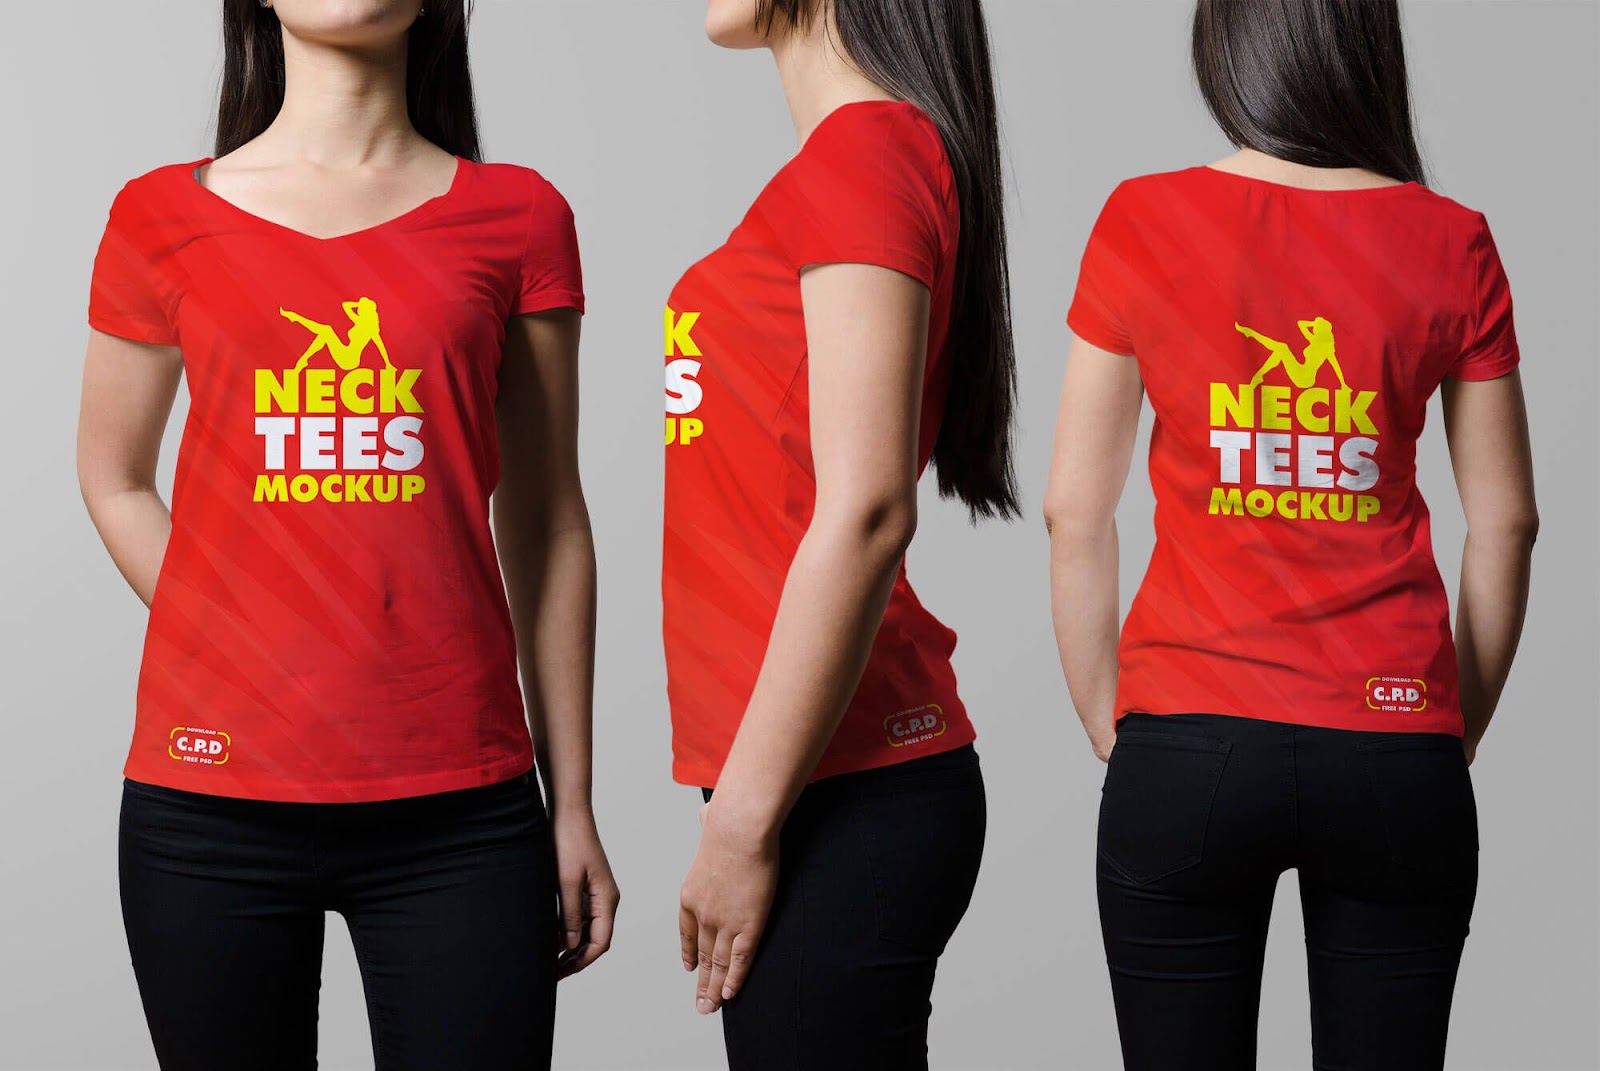 Download Free 3557+ T Shirt Mockup Generator Online Yellowimages Mockups these mockups if you need to present your logo and other branding projects.